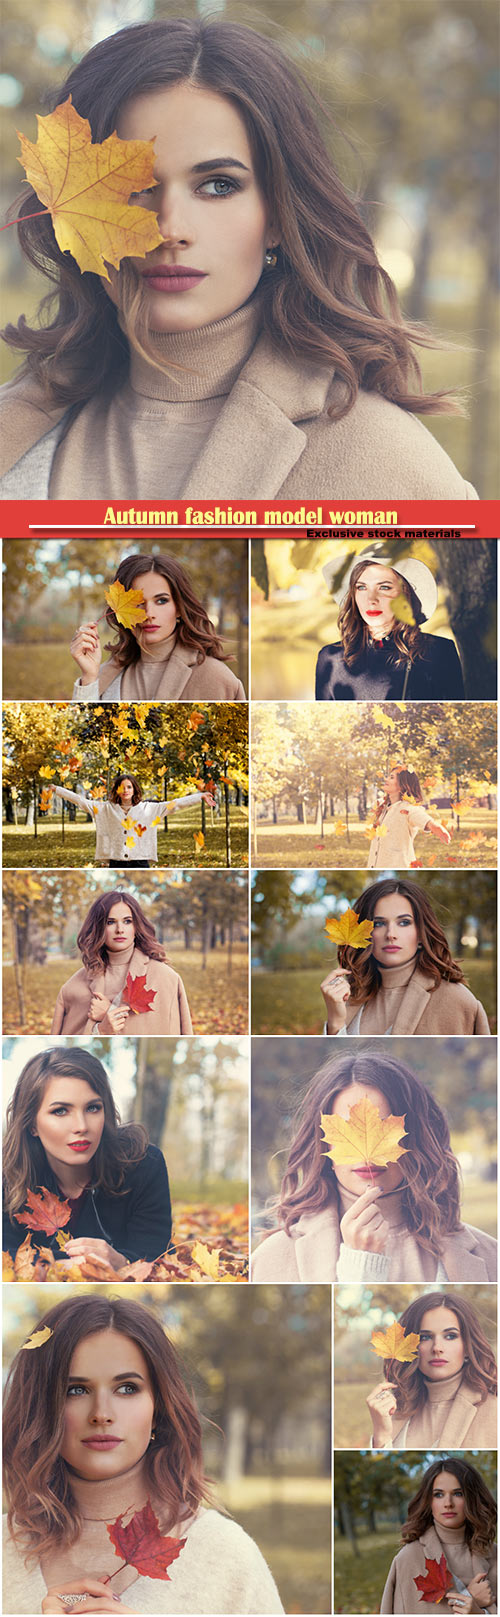 Autumn fashion model woman with wavy hair and fall maple leaf outdoors